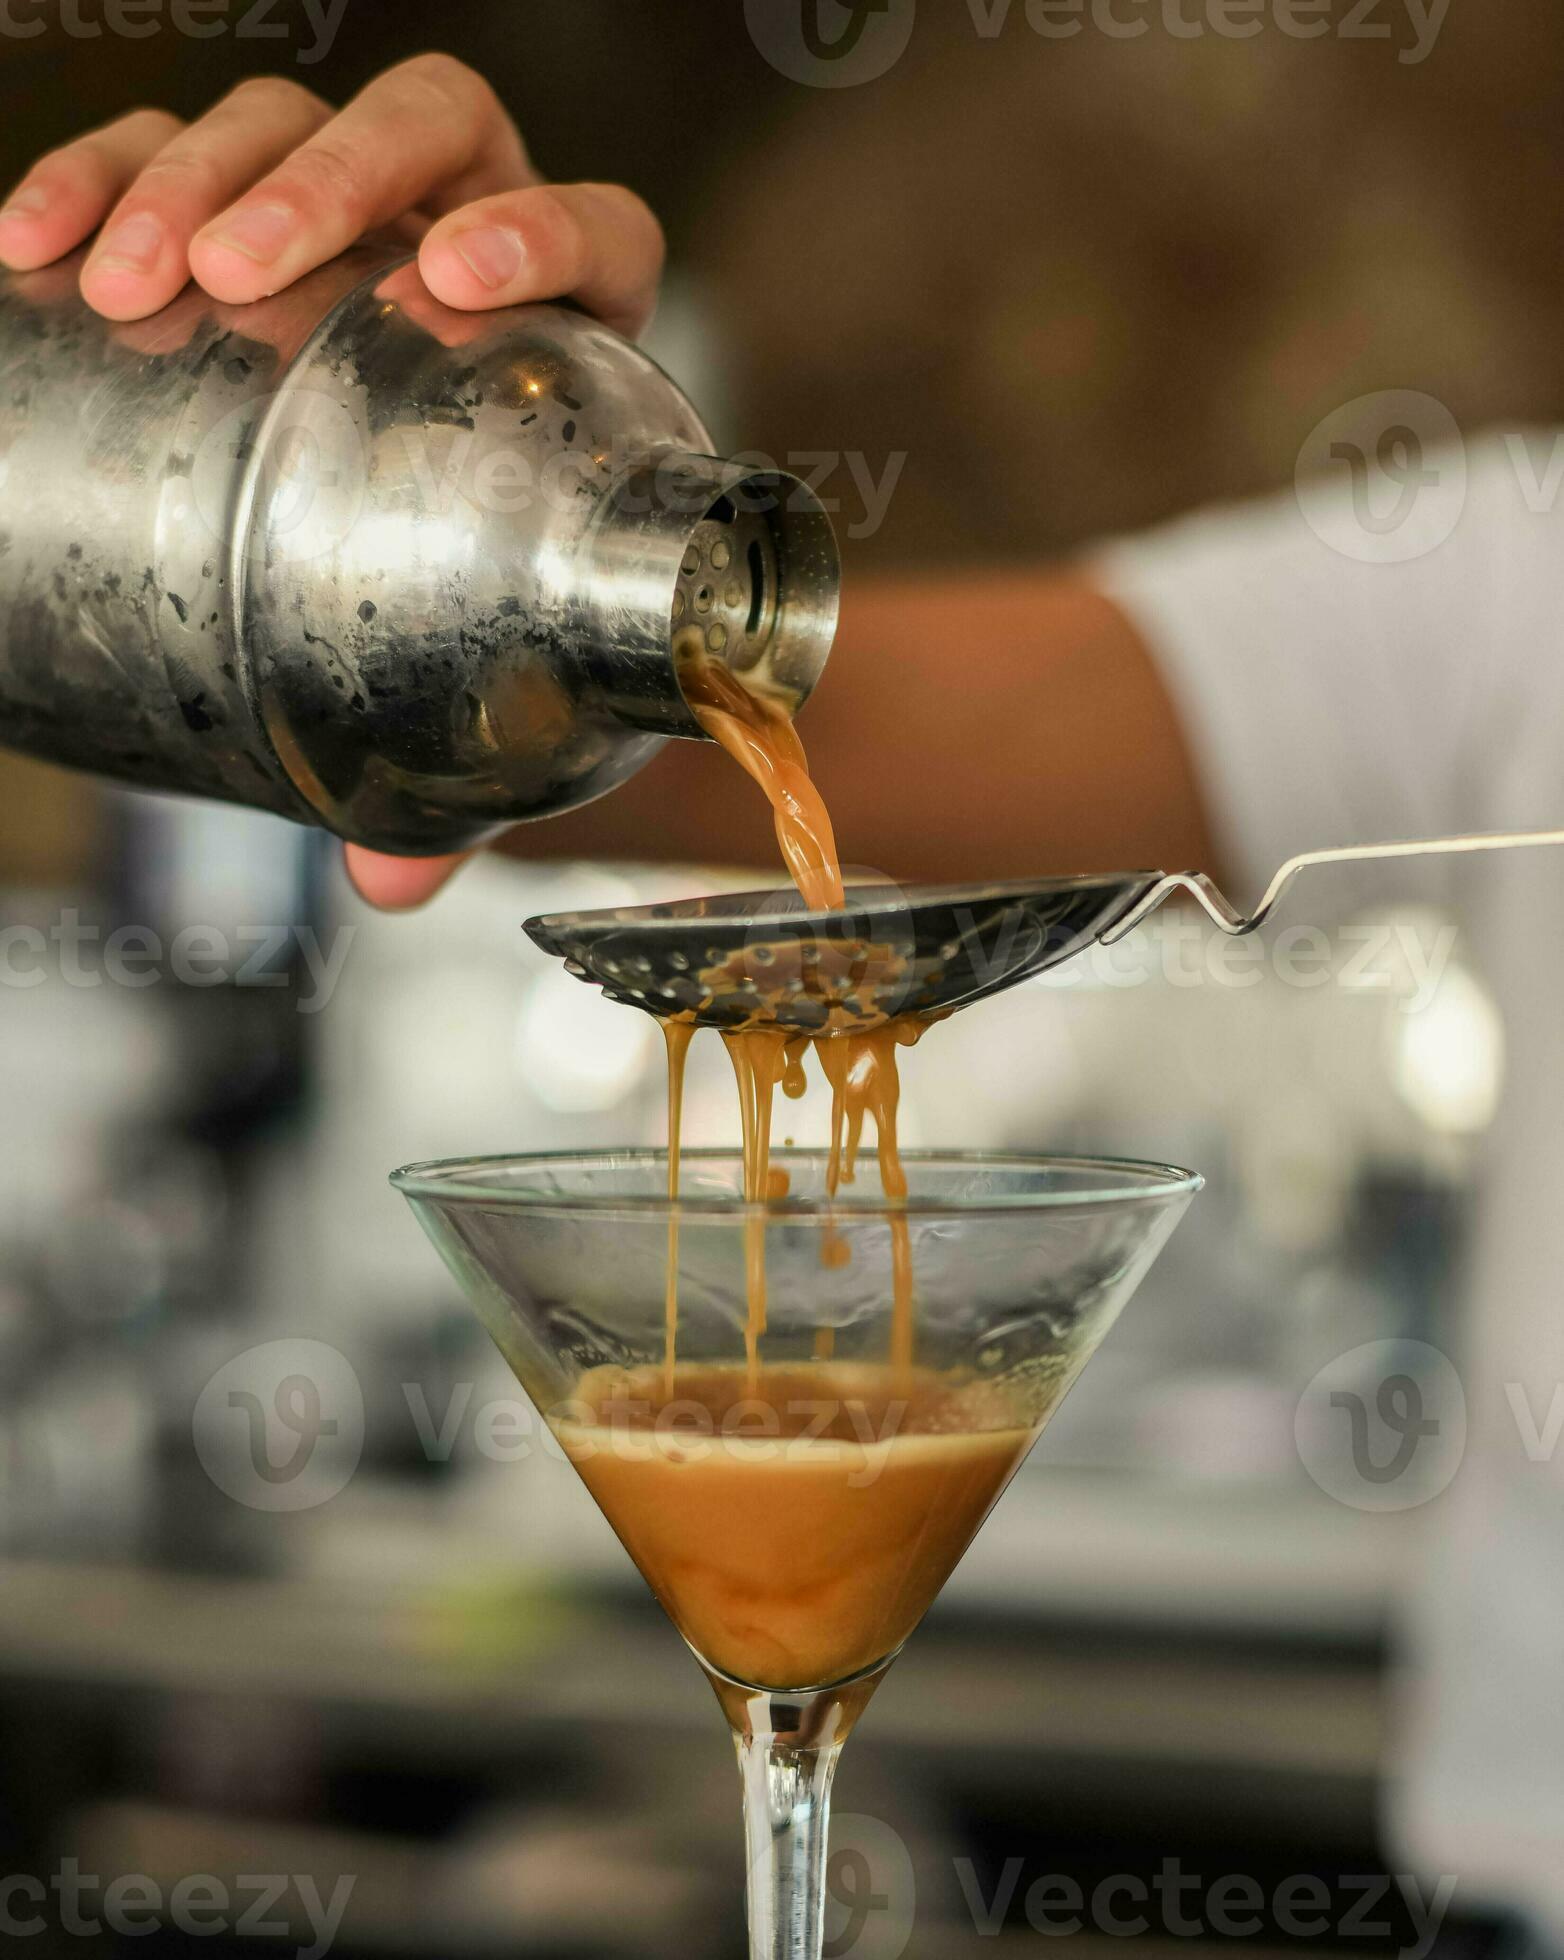 https://static.vecteezy.com/system/resources/previews/033/886/662/large_2x/espresso-martini-cocktail-made-with-espresso-coffee-liqueur-and-vodka-photo.jpg